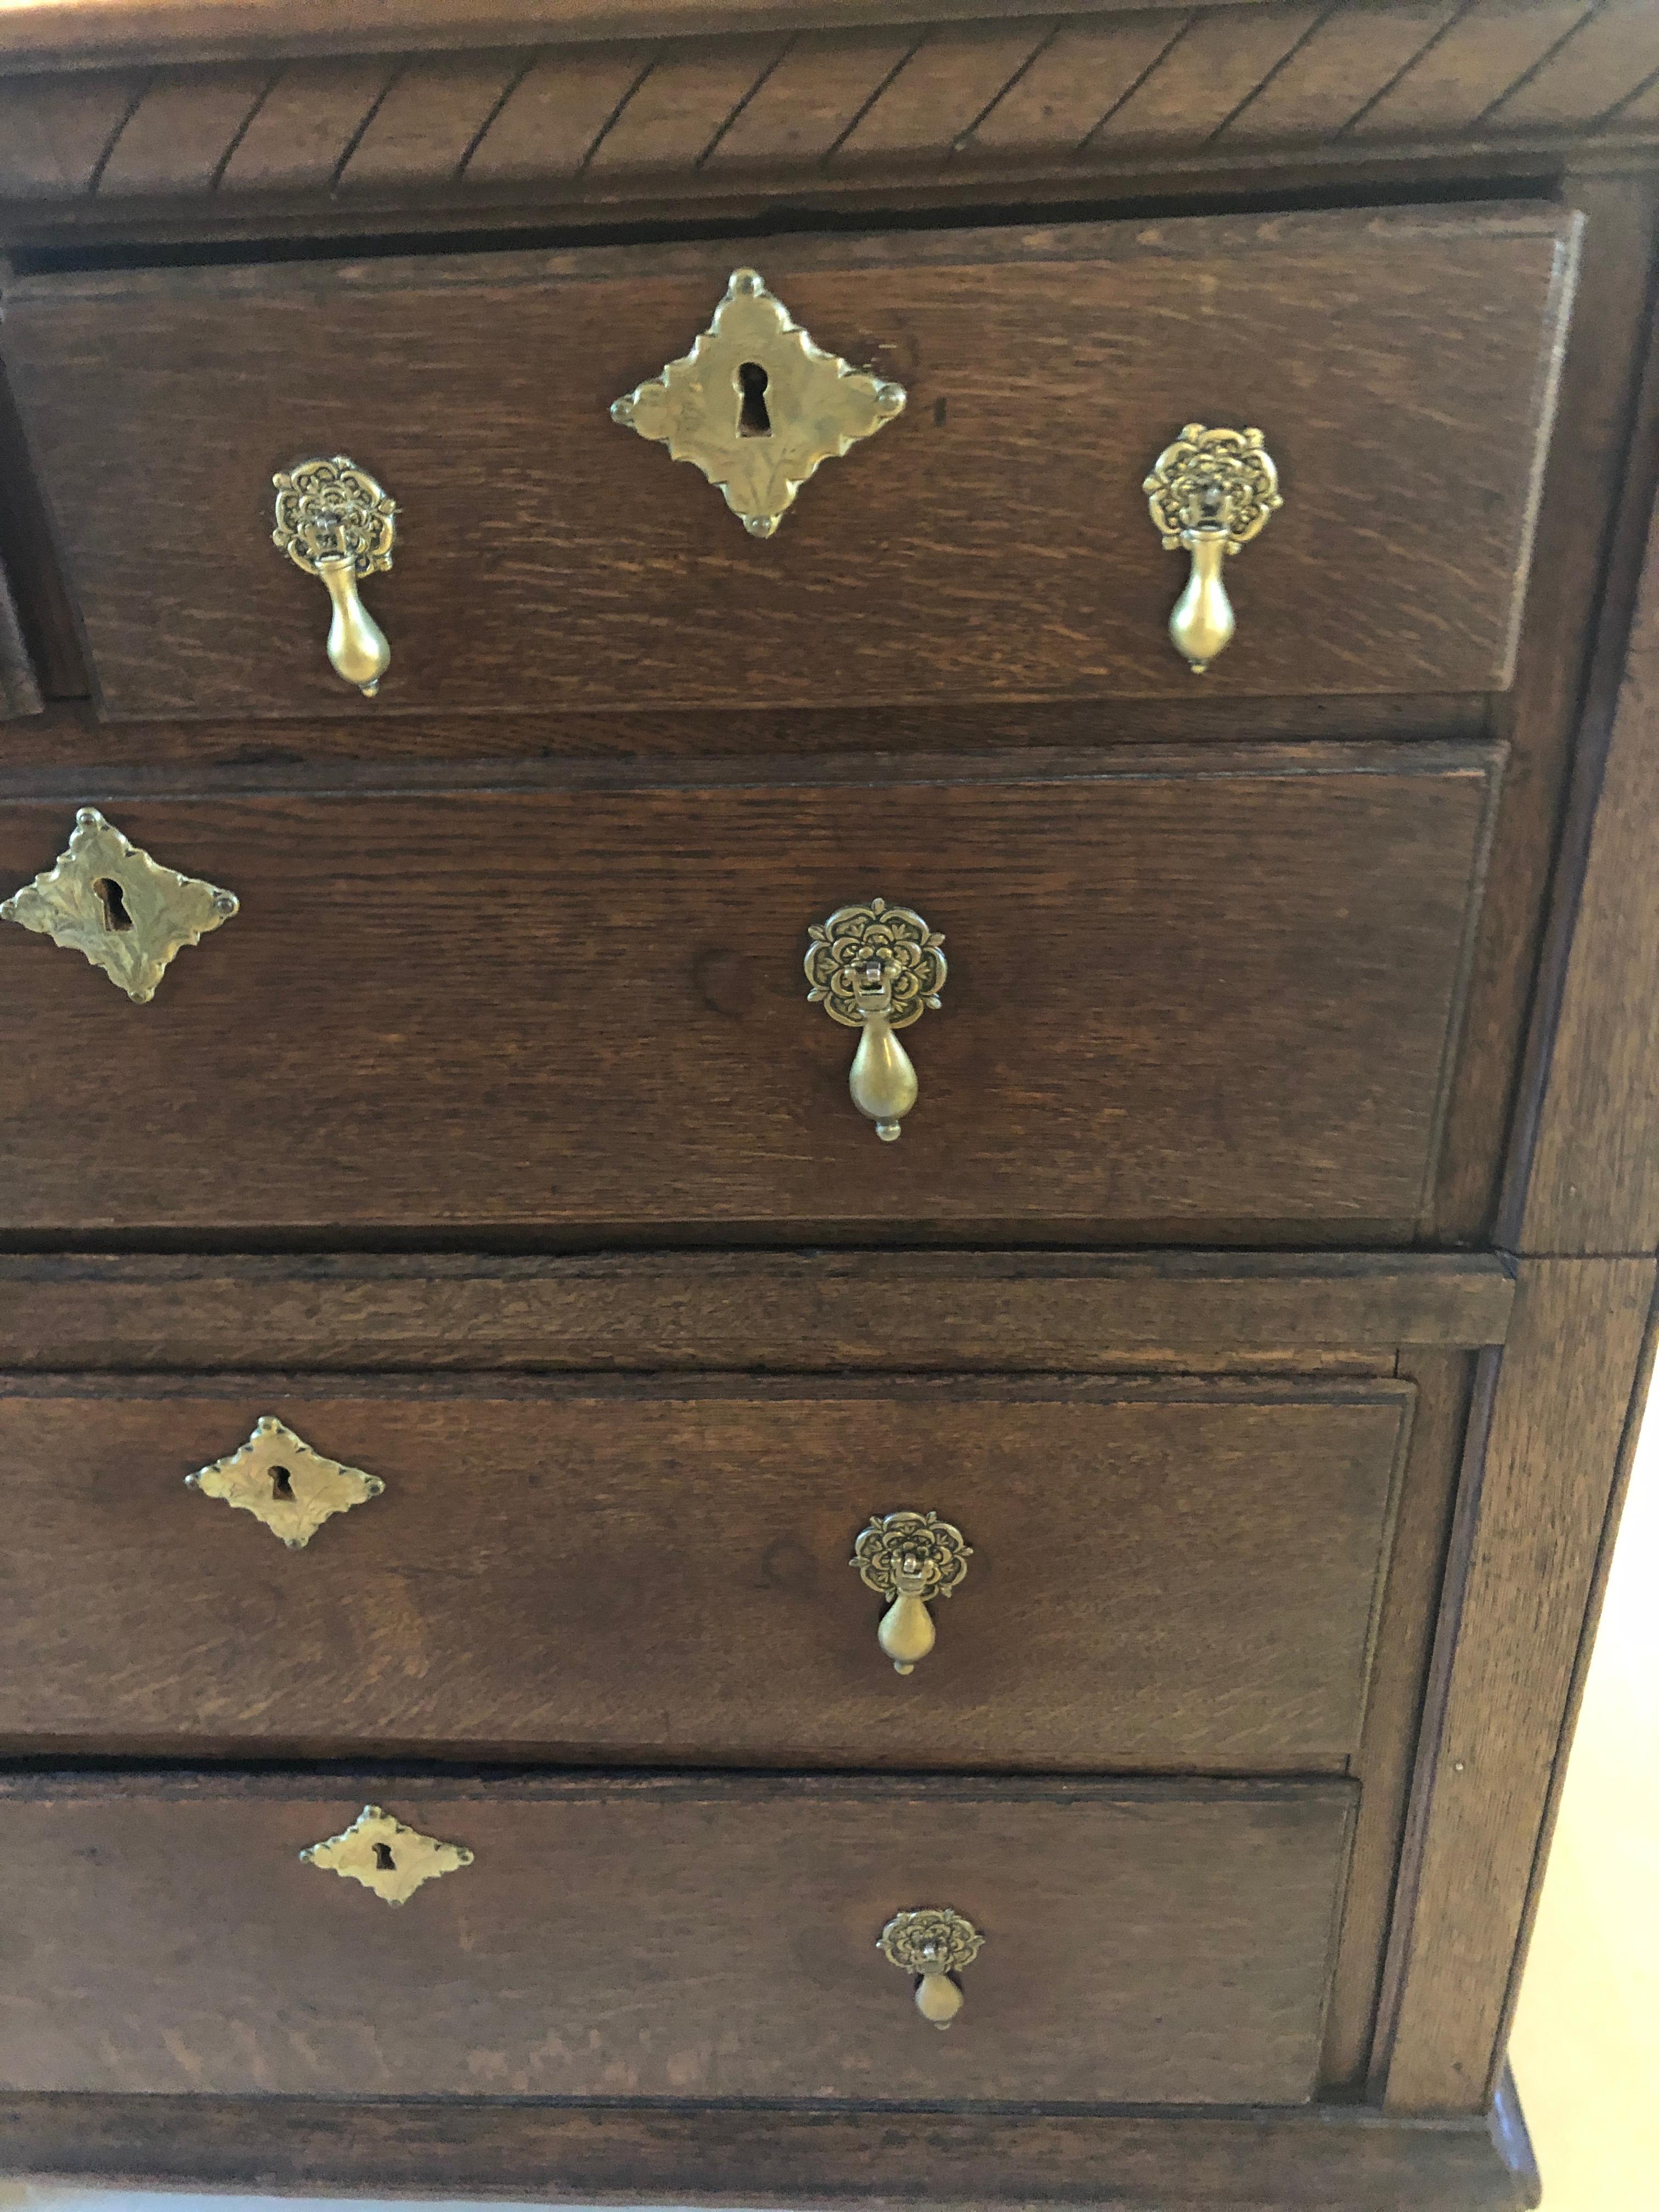 Stunning masculine English walnut chest of drawers having two small drawers at the top and 3 large drawers underneath. Original brass hardware is beautiful and all drawers work smoothly.